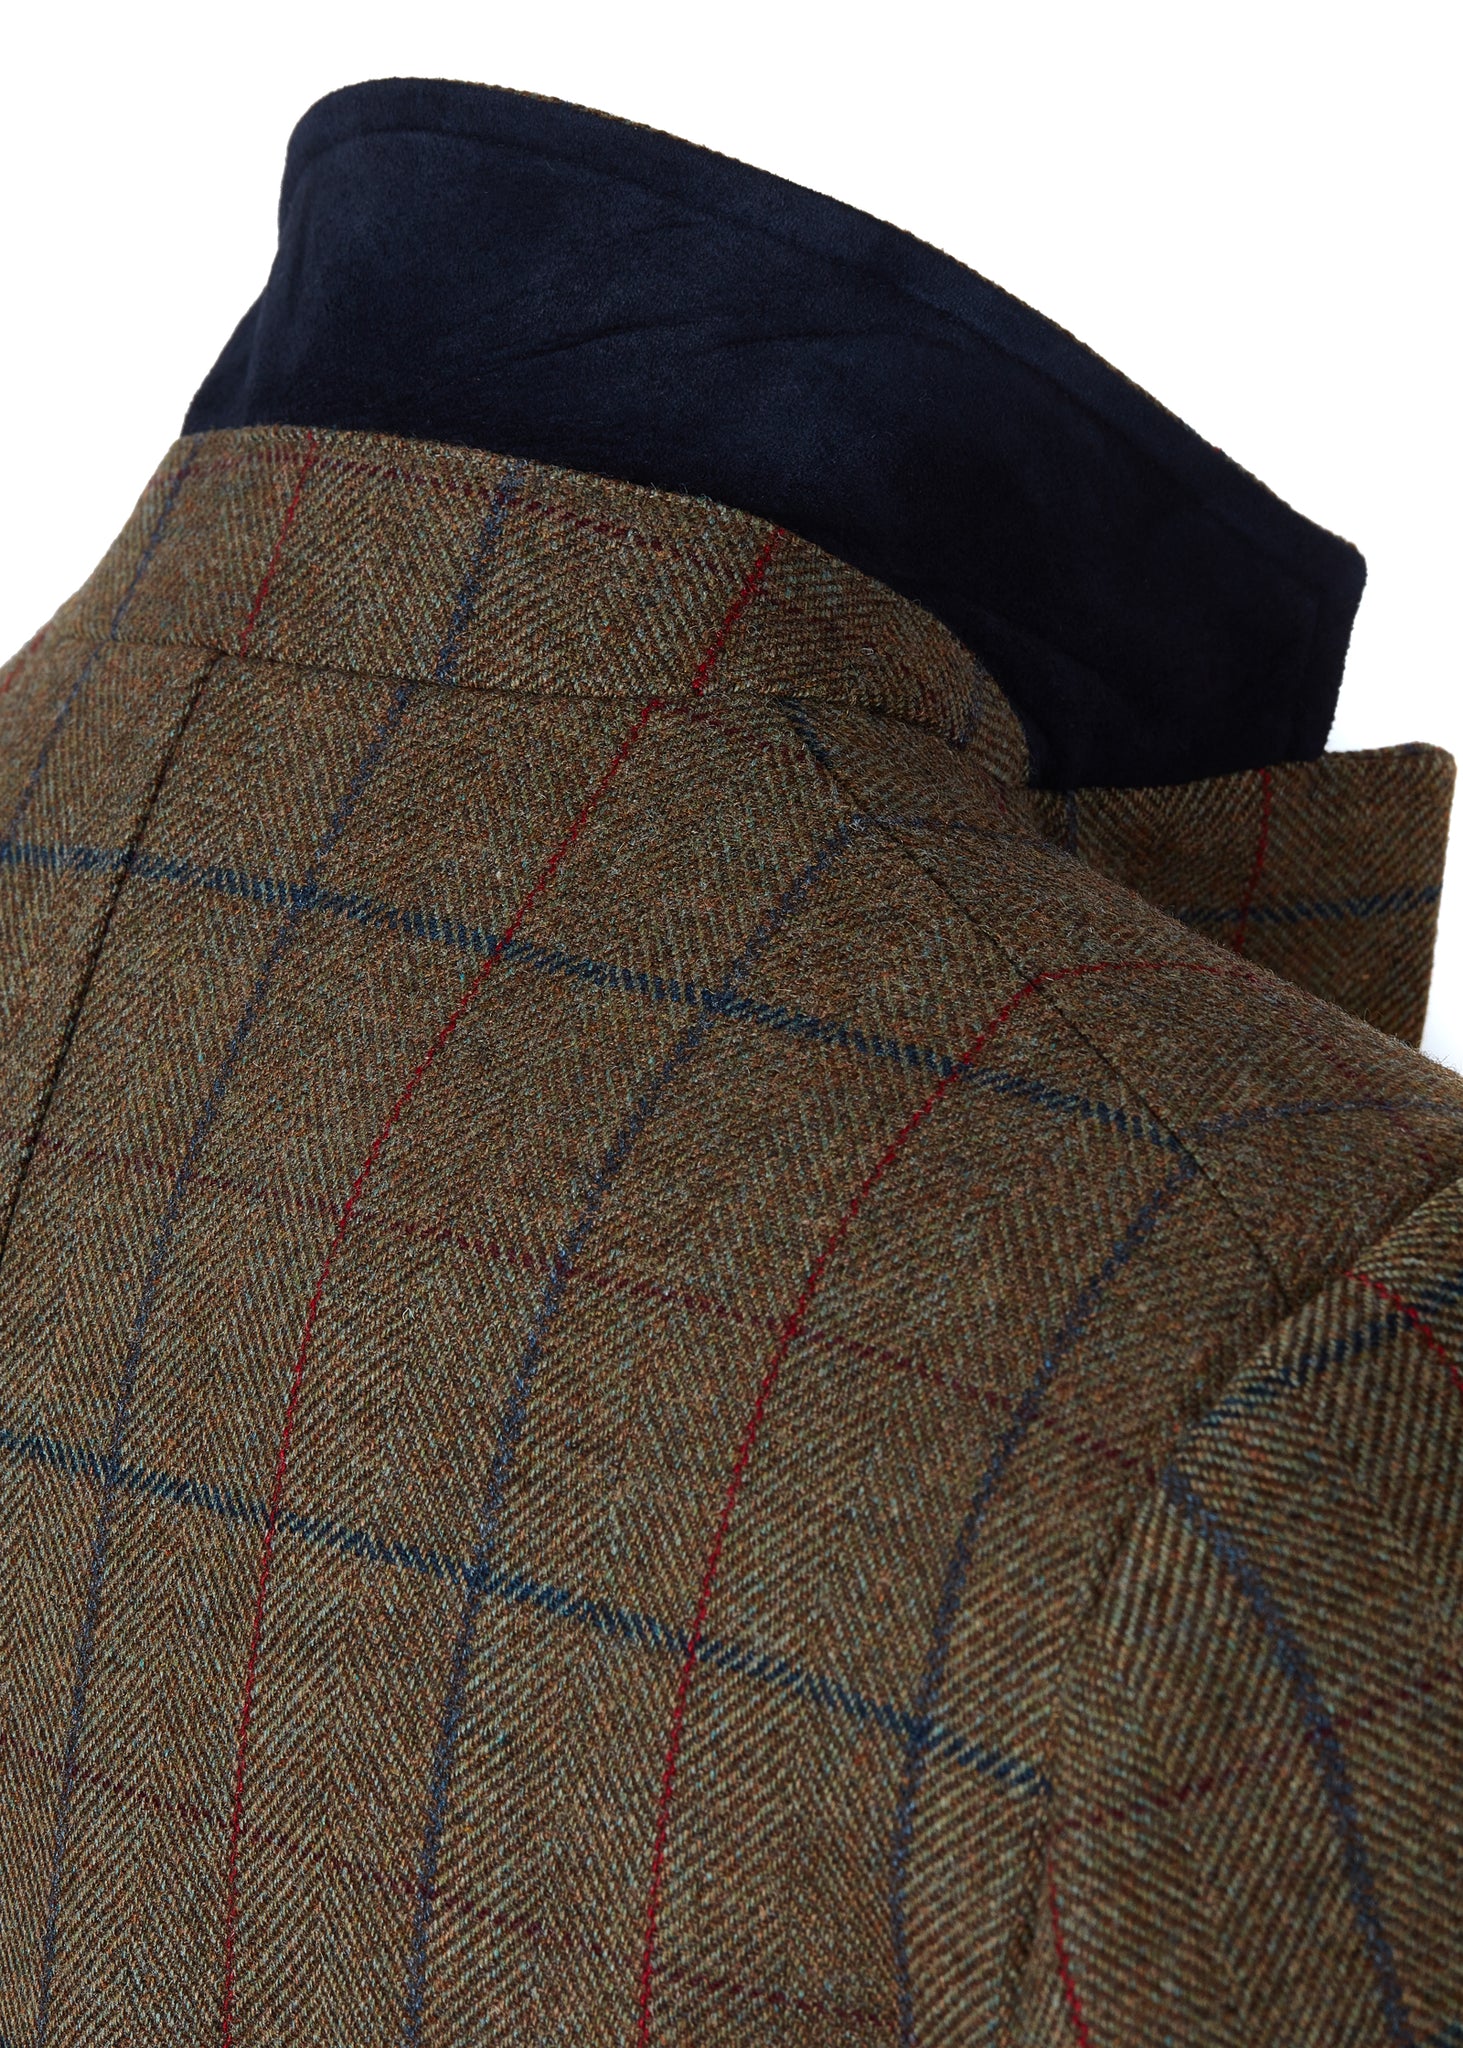 Green tweed mens coat with collar popped to show navy under collar